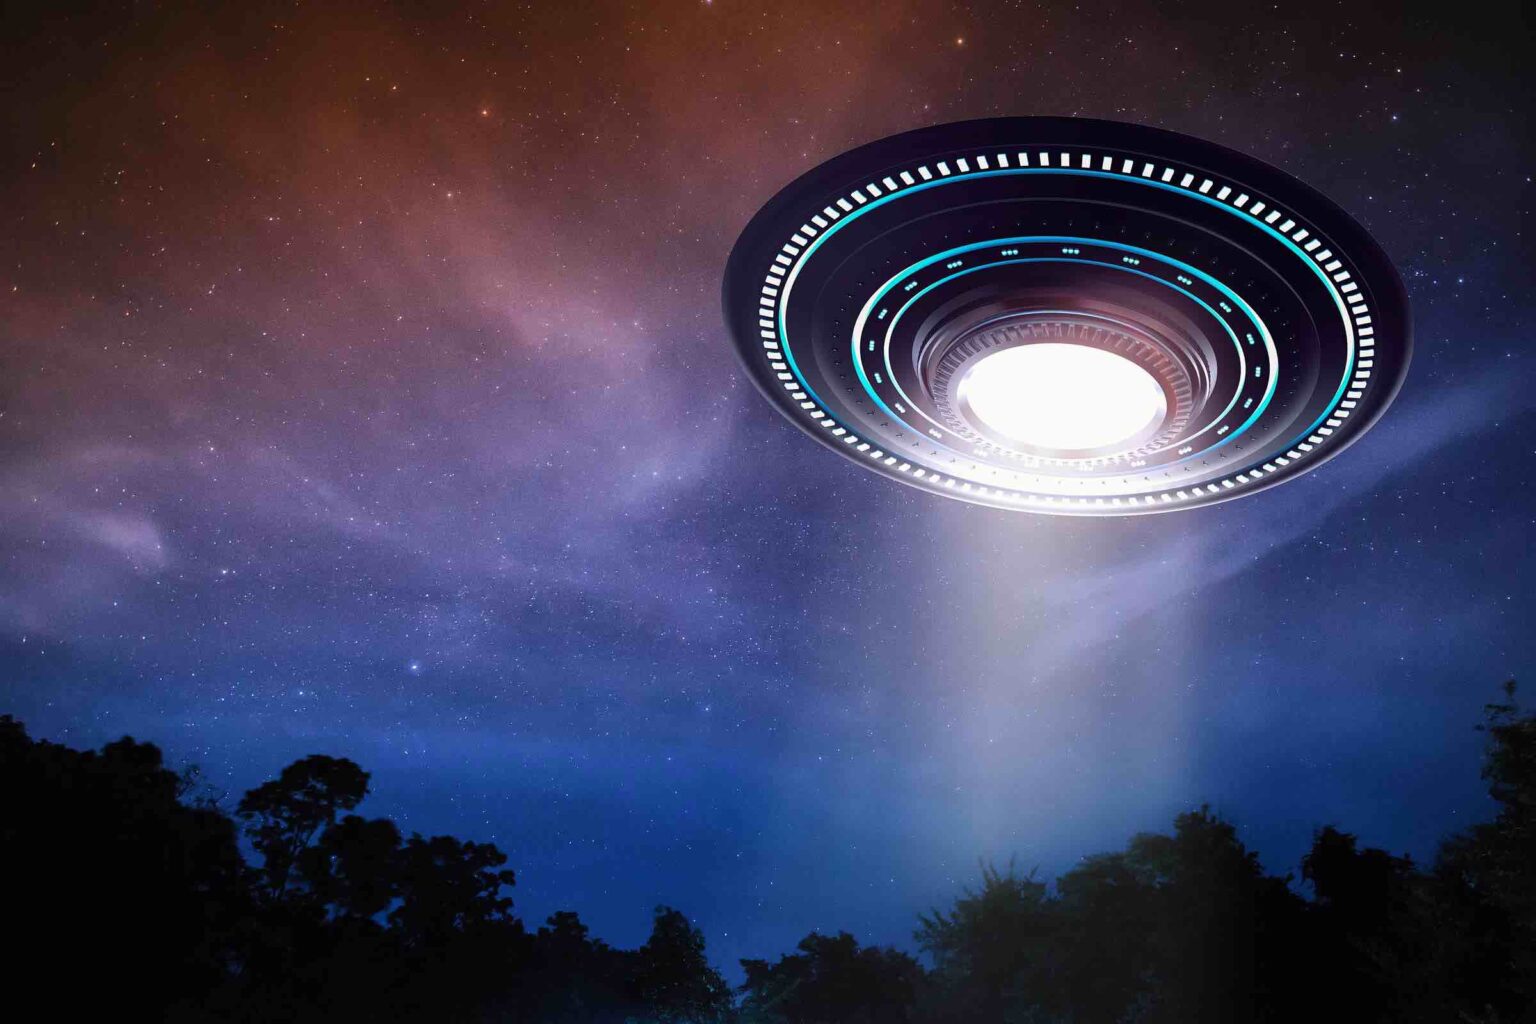 These UFO videos are pretty convincing evidence that there have been some odd encounters over the years. We'll let you be the judge.